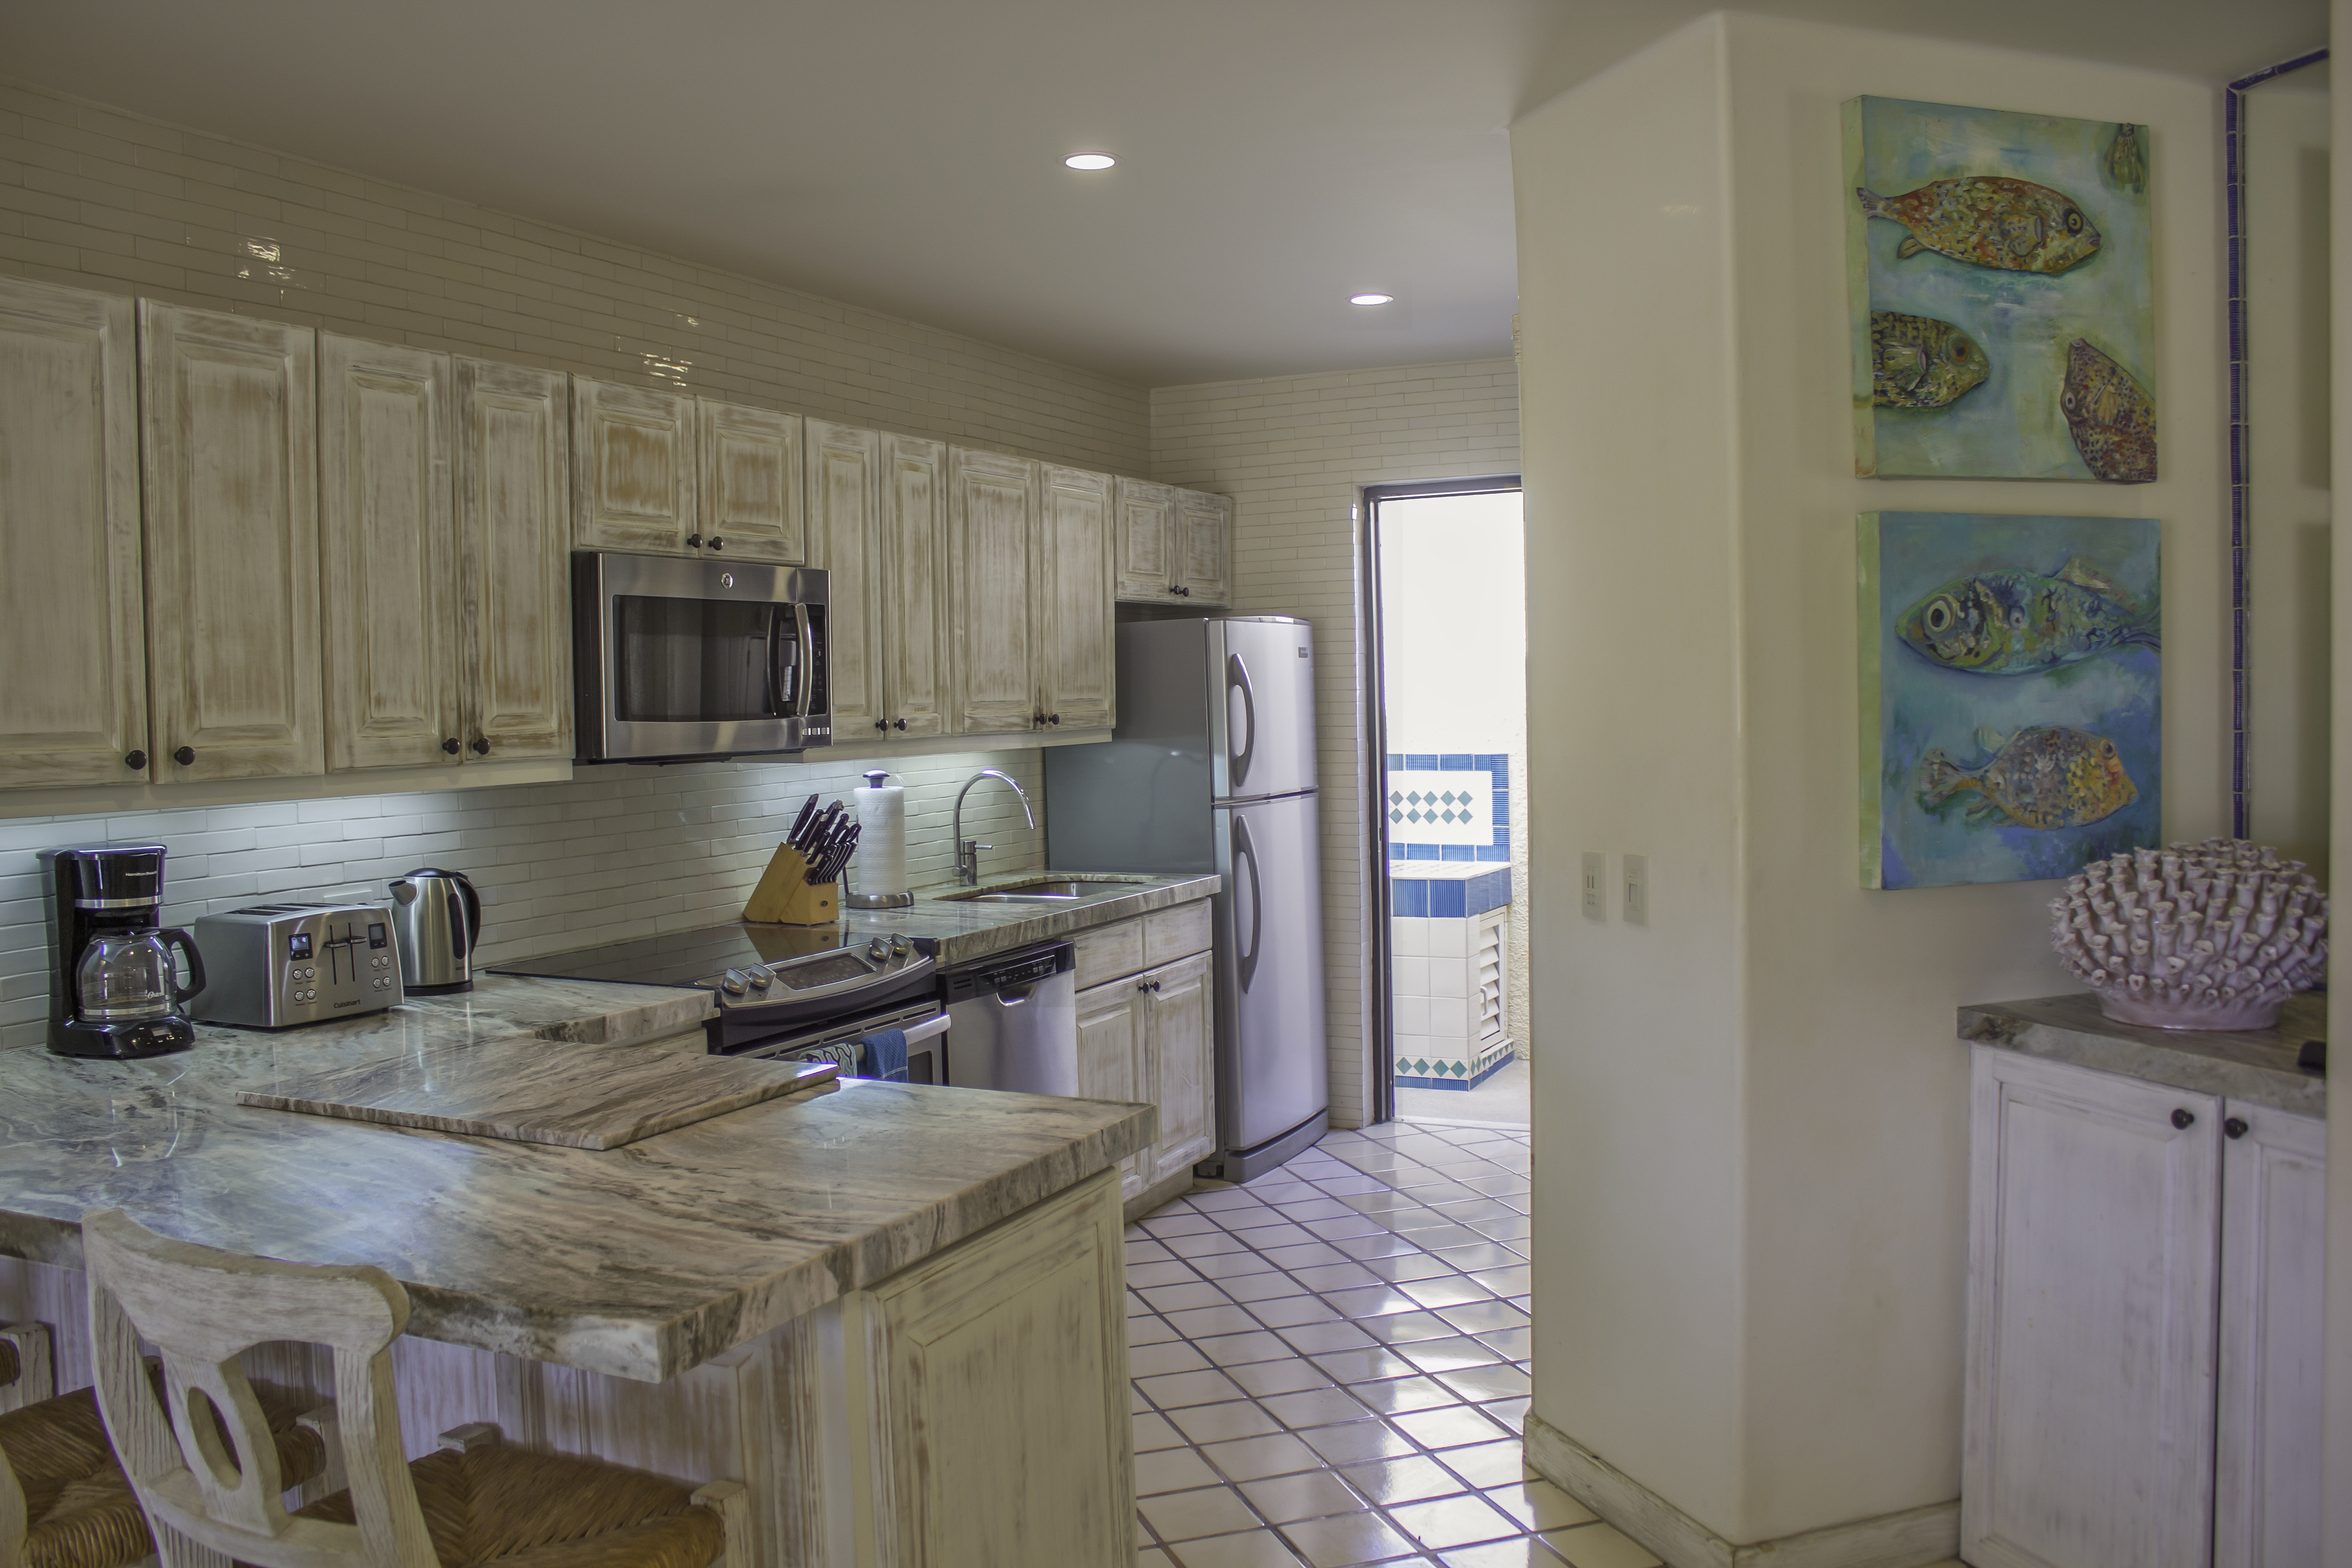 kitchen of terrasol beach resort condo for rent in cabo san lucas